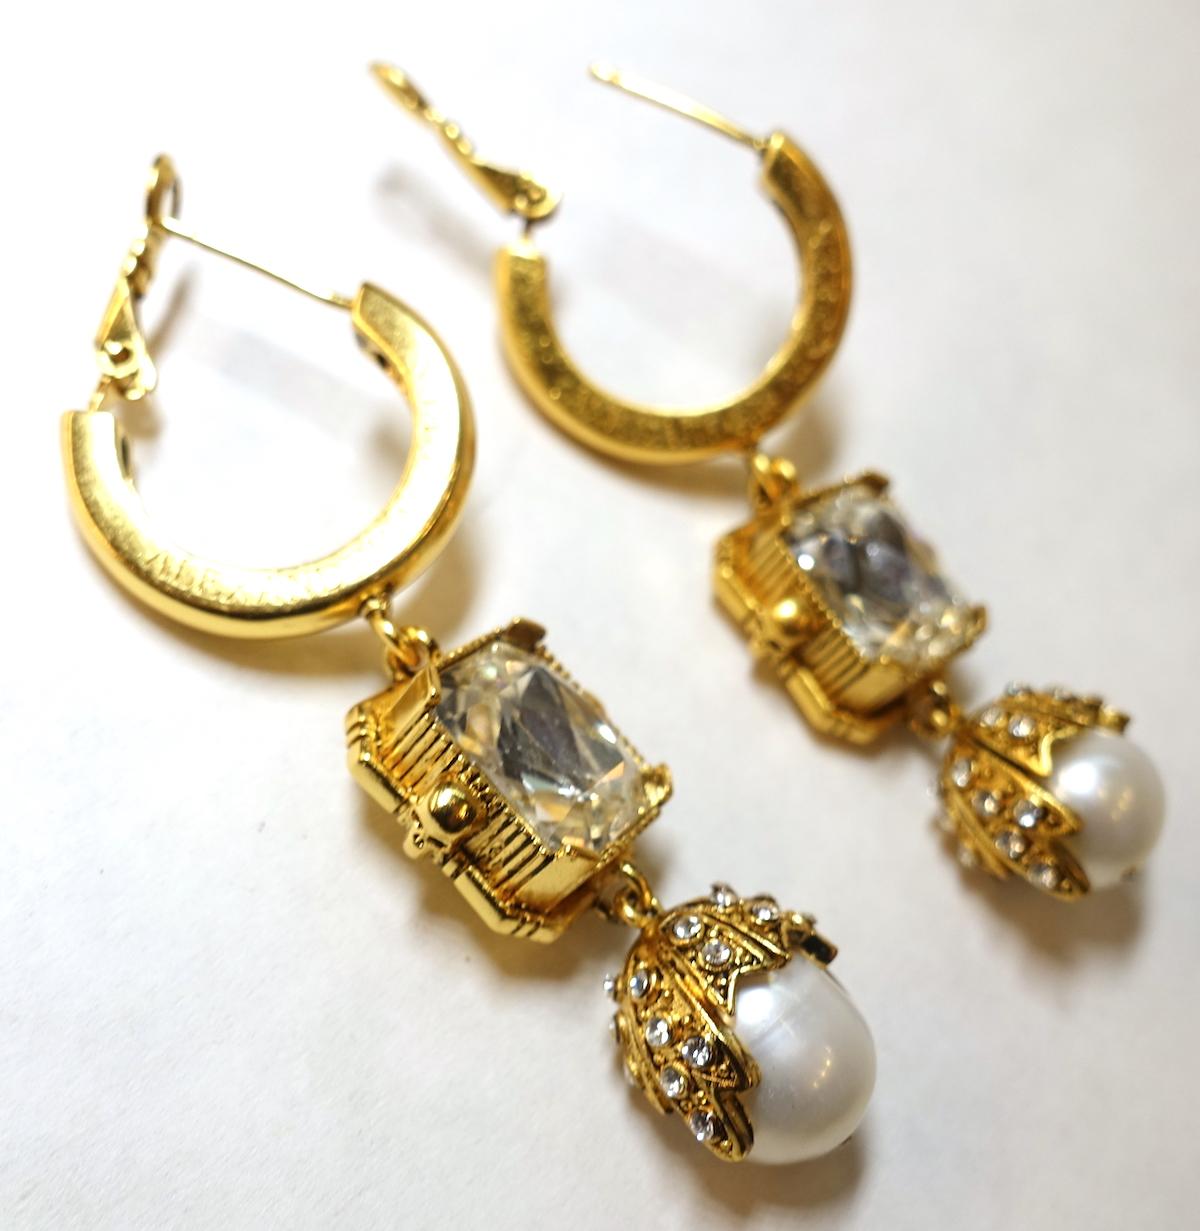 Everybody is looking for Alexander McQueen jewelry.  Here is one for you. These vintage signed Alexander McQueen earrings are designed with faux pearls with clear crystals accents in a gold tone setting.  These pierced earrings measure 2-1/4” x 3/4”